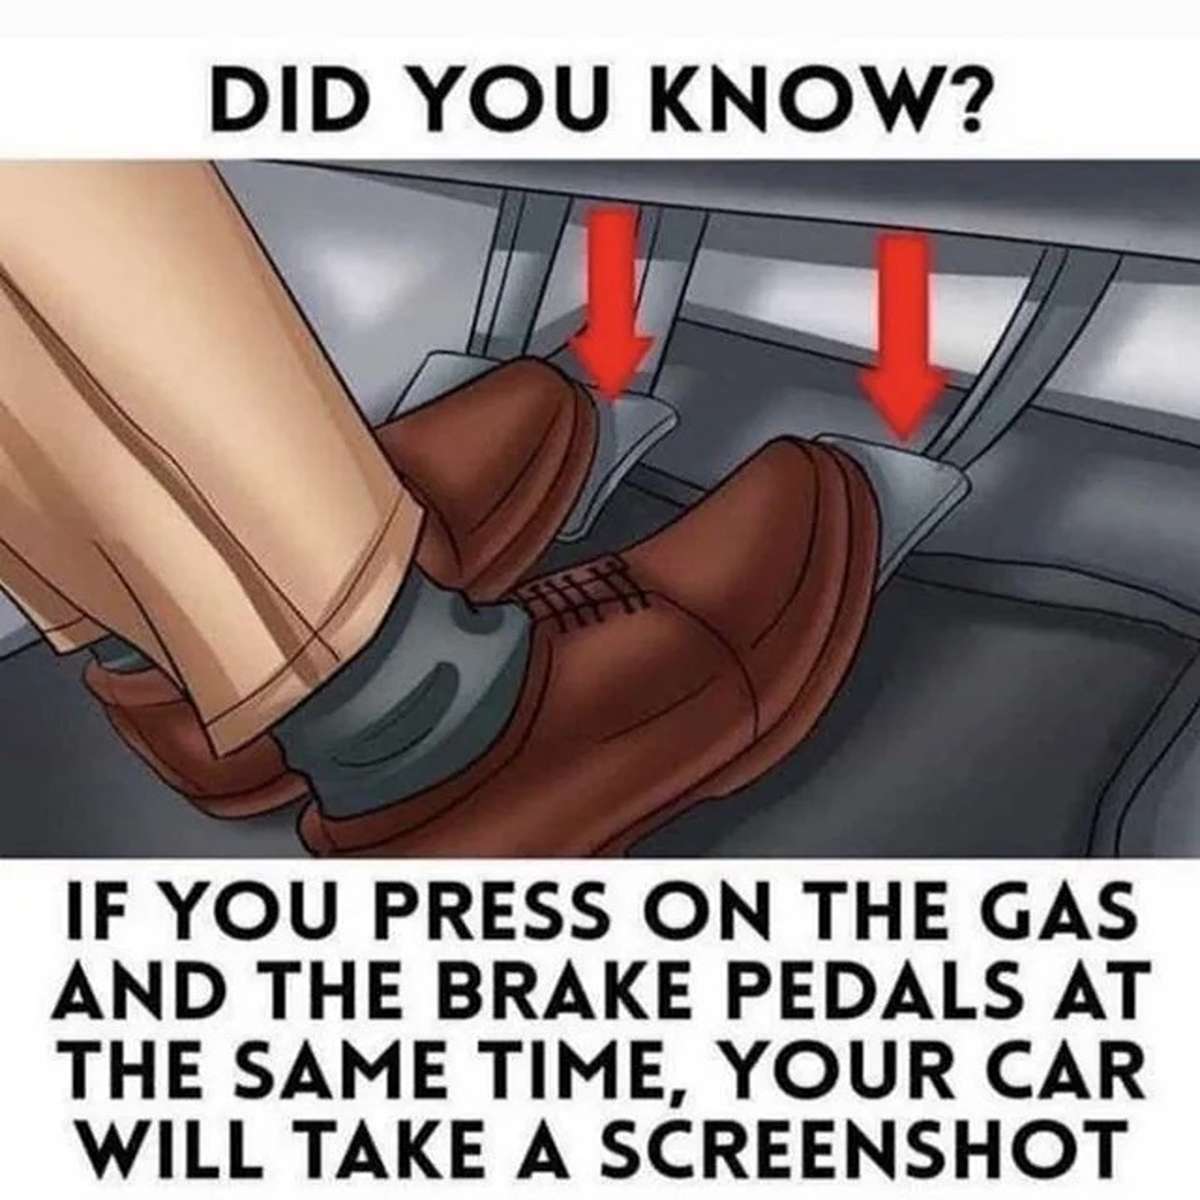 fresh memes - car takes a screenshot meme - Did You Know? If You Press On The Gas And The Brake Pedals At The Same Time, Your Car Will Take A Screenshot